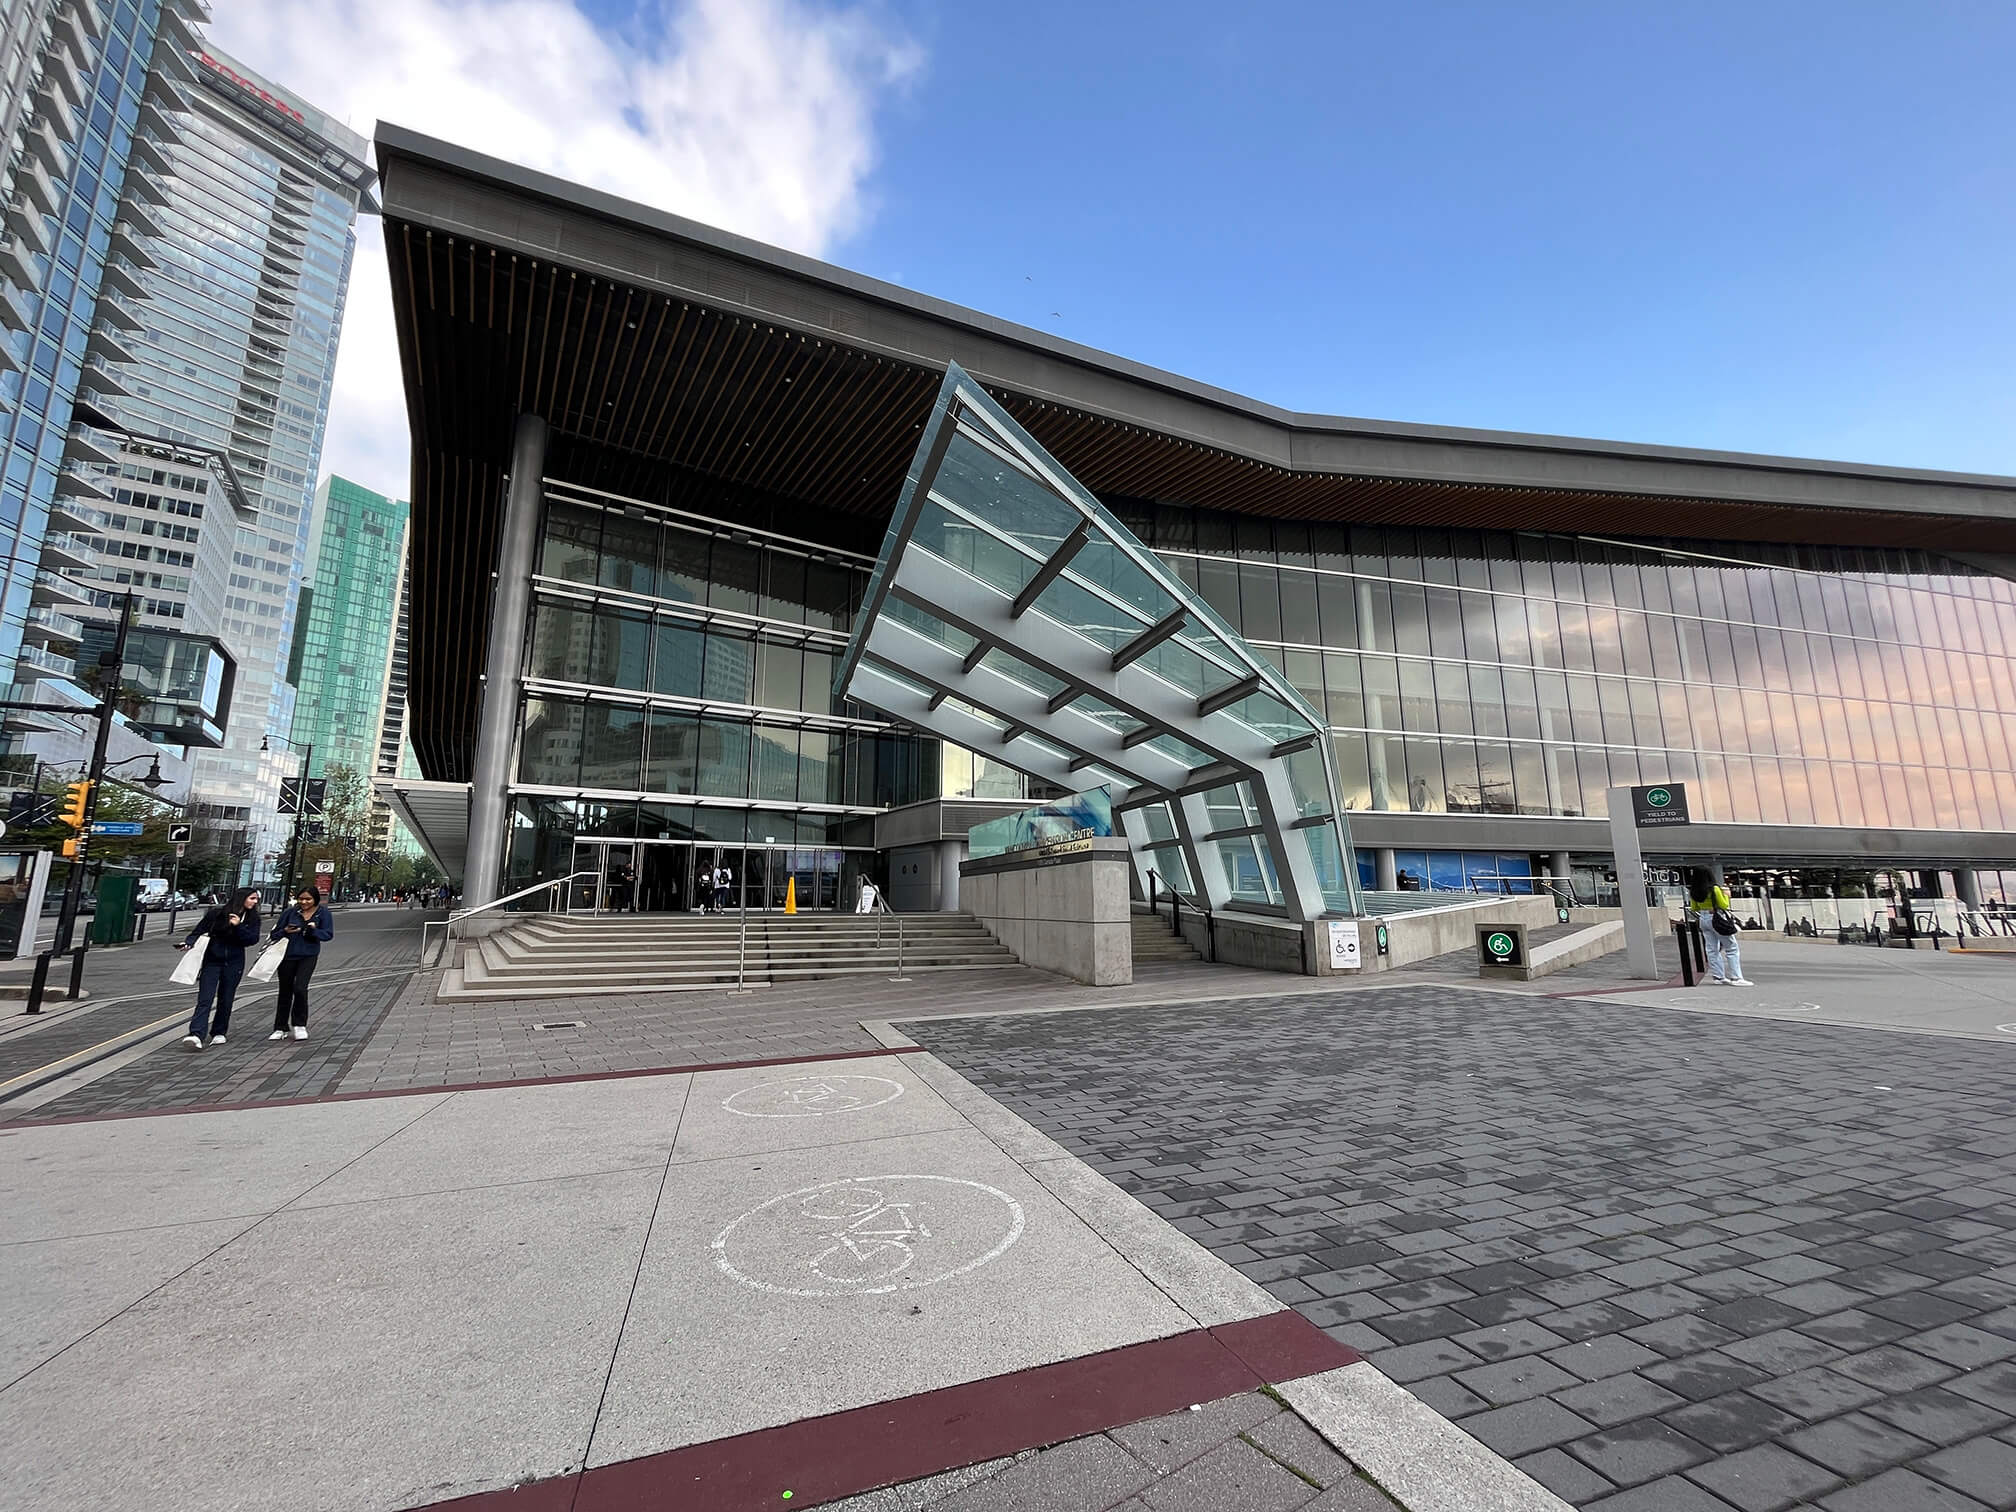 Image of the main entrance of Vancouver Convention Centre West, with the stairs leading to the entrance and adjacent ramp.